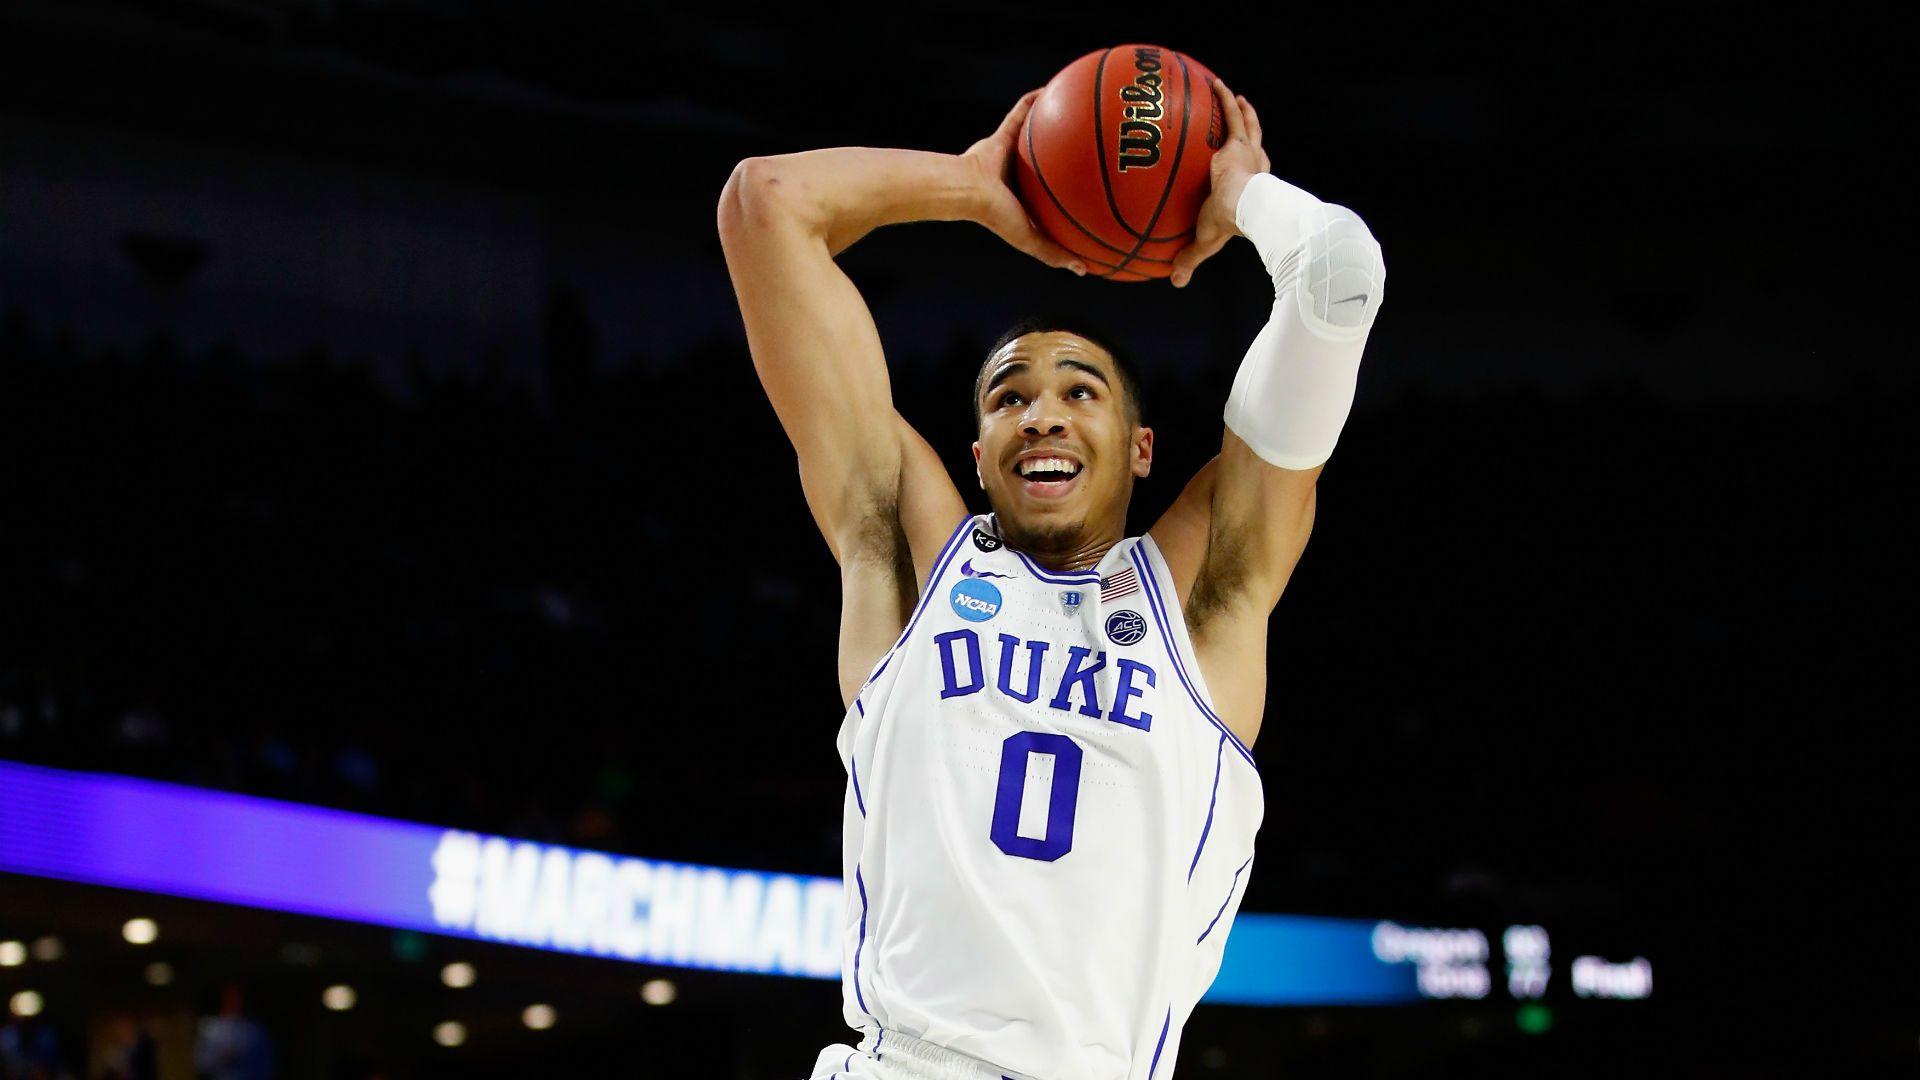 NBA Draft scouting report: Jayson Tatum takes polished offensive